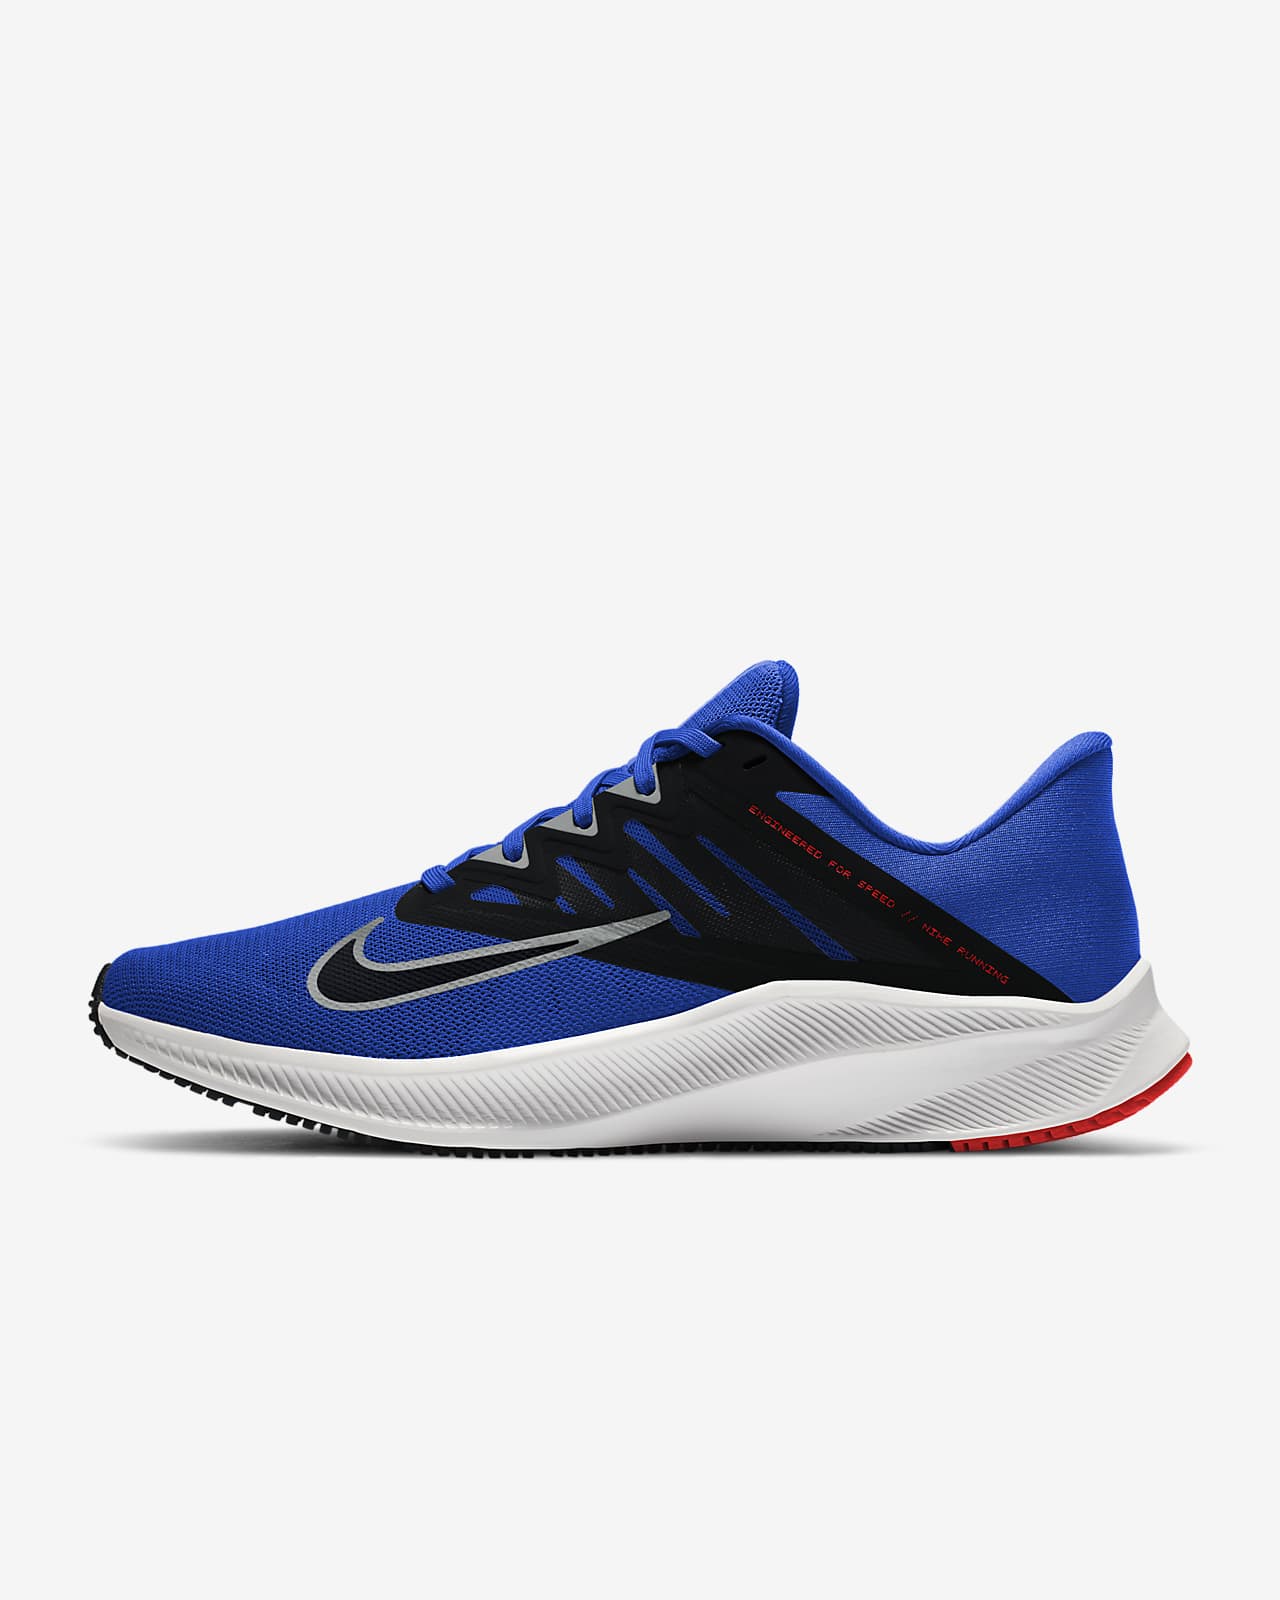 Nike Quest 3 Men's Road Running Shoes 